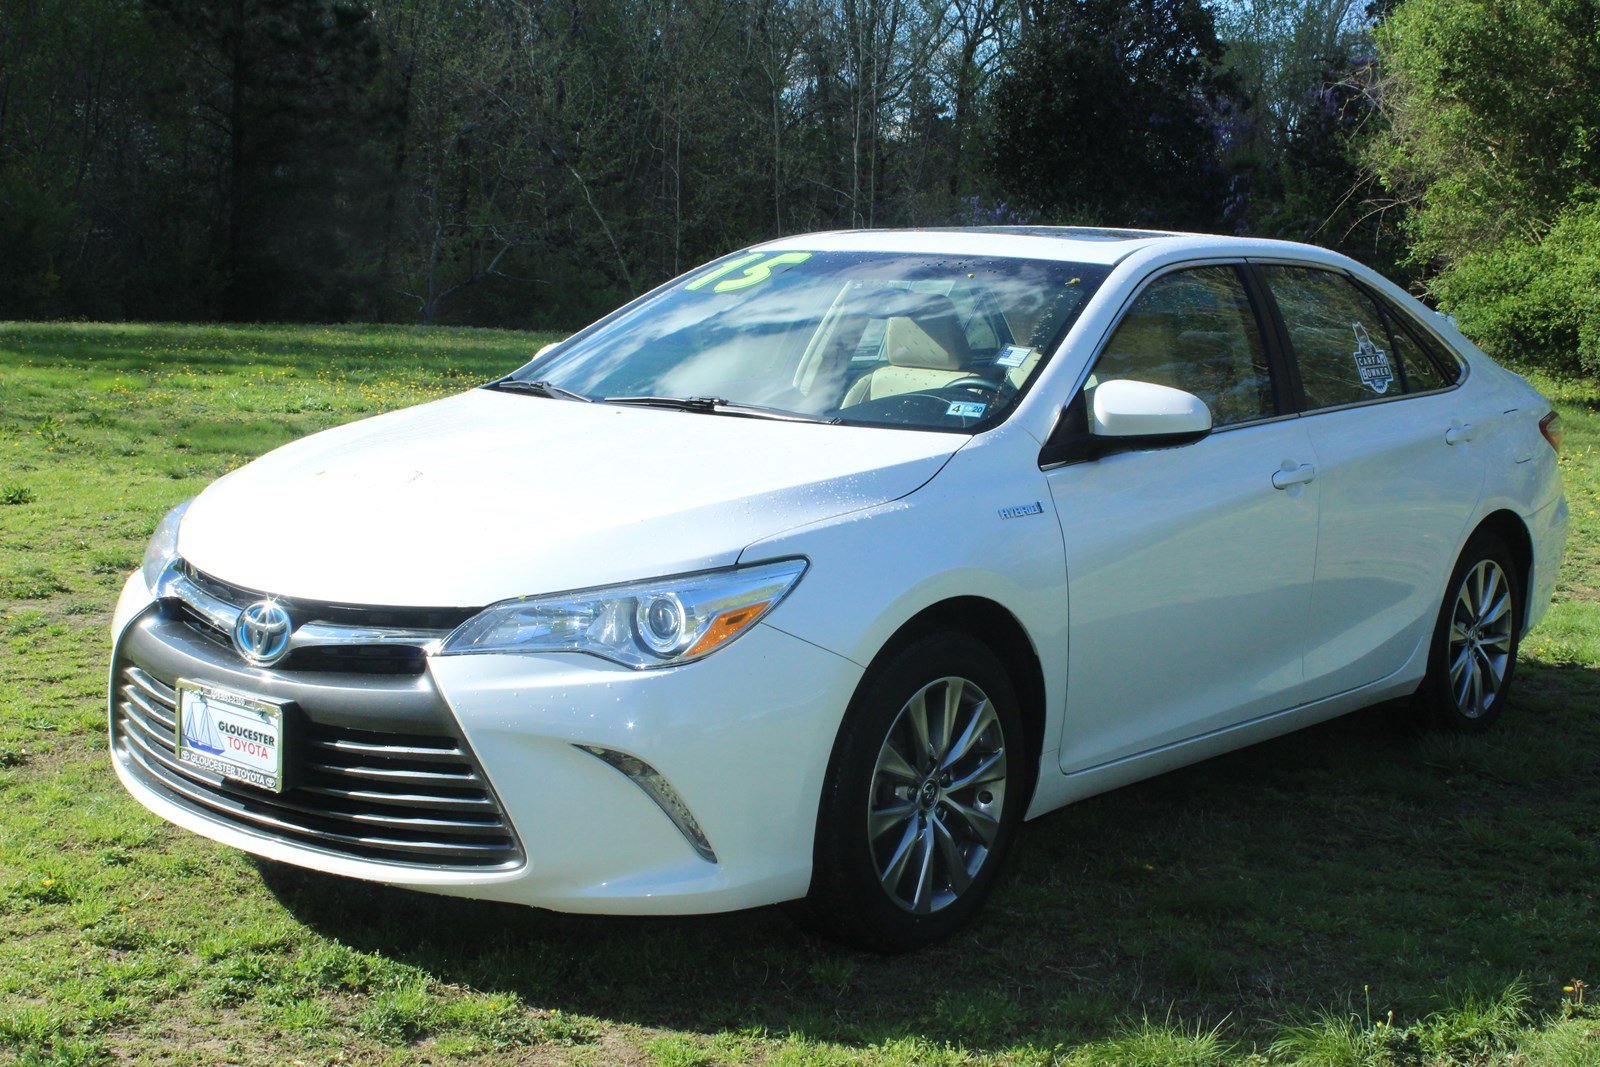 Pre-Owned 2015 Toyota Camry Hybrid XLE 4dr Car in Gloucester #P2431 | Gloucester Toyota